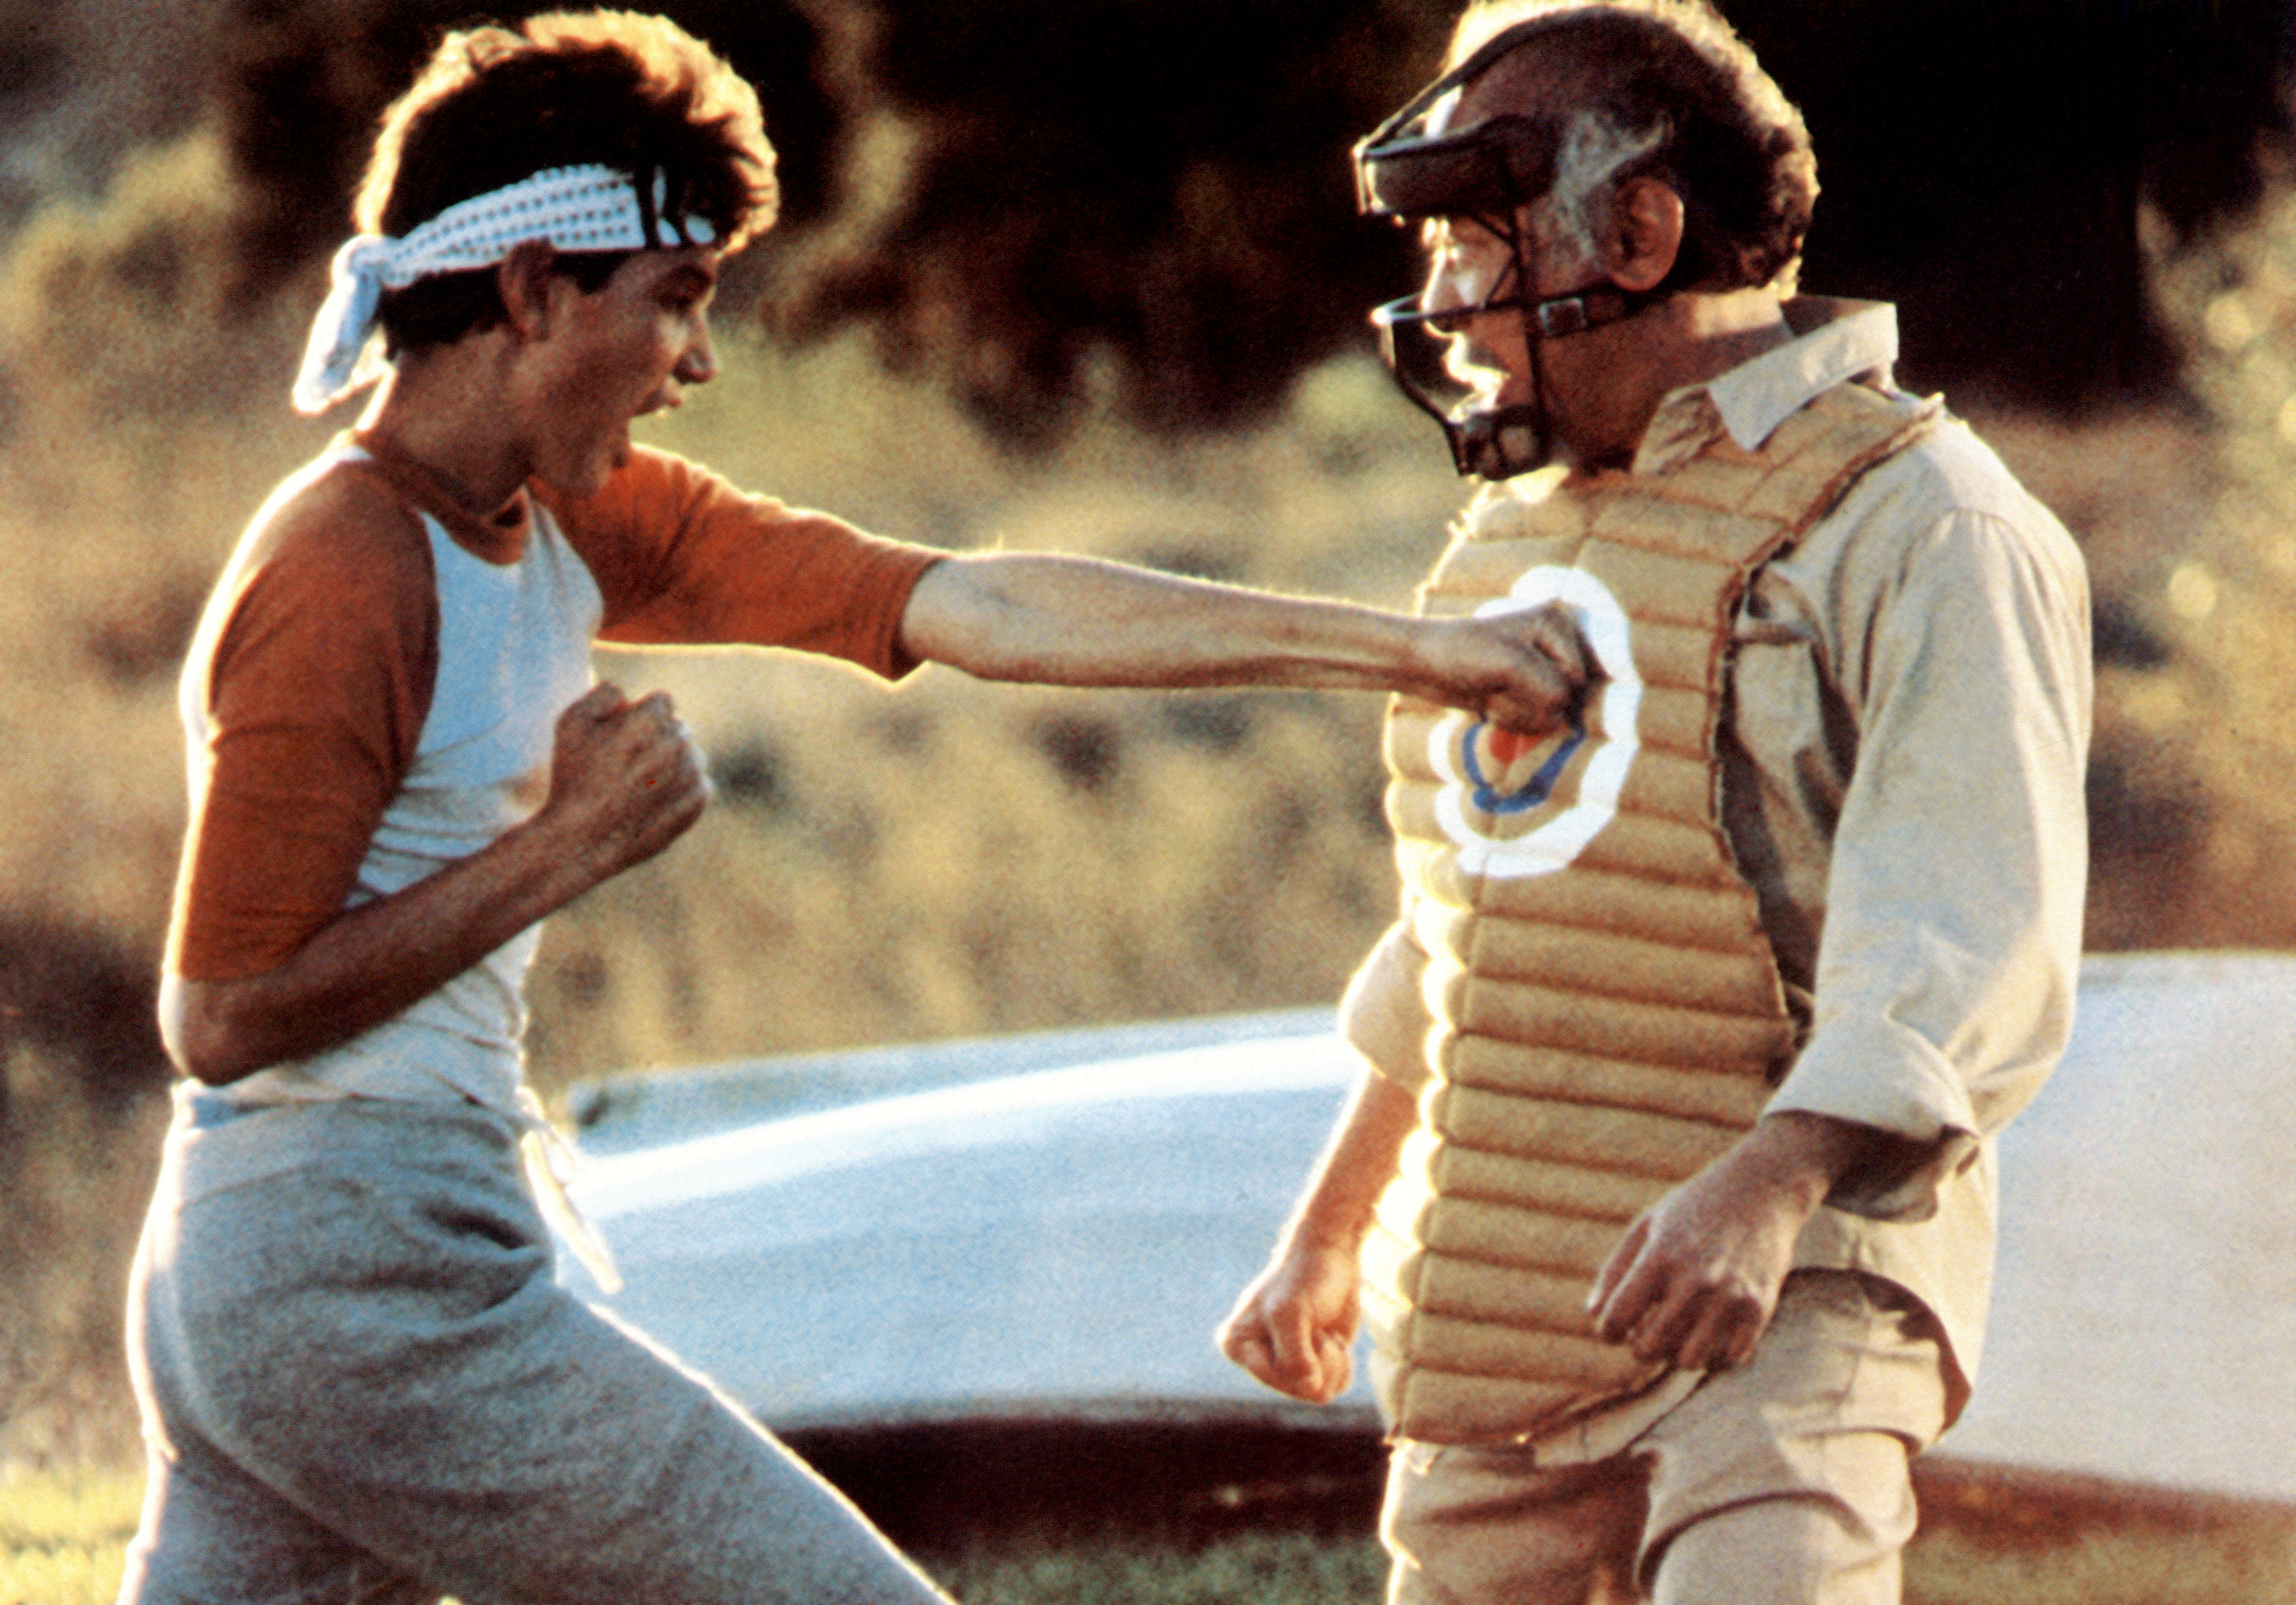 A scene from &#x27;The Karate Kid&#x27; with Daniel Larusso practicing a punch on Mr. Miyagi wearing protective body gear